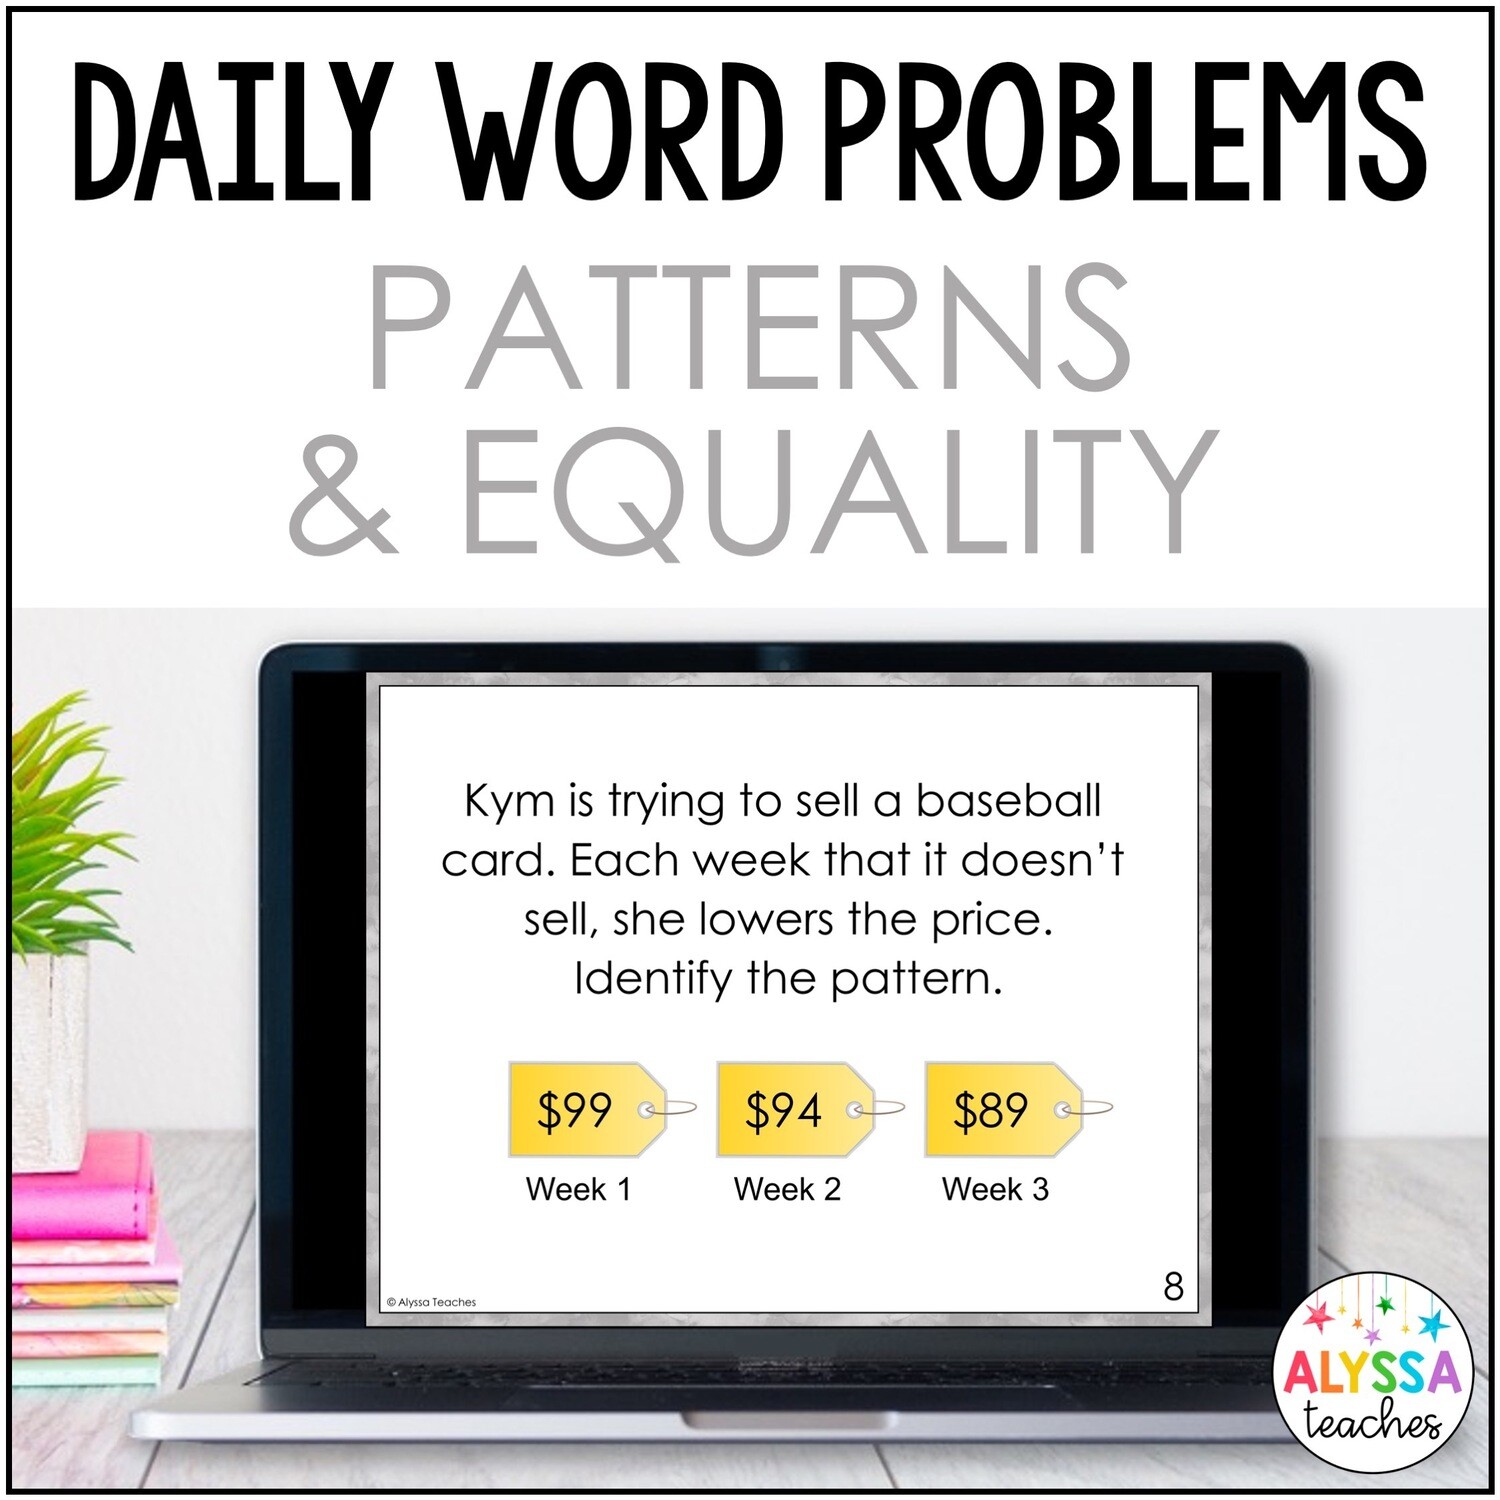 Patterns and Equality Word Problems for Daily Math Review